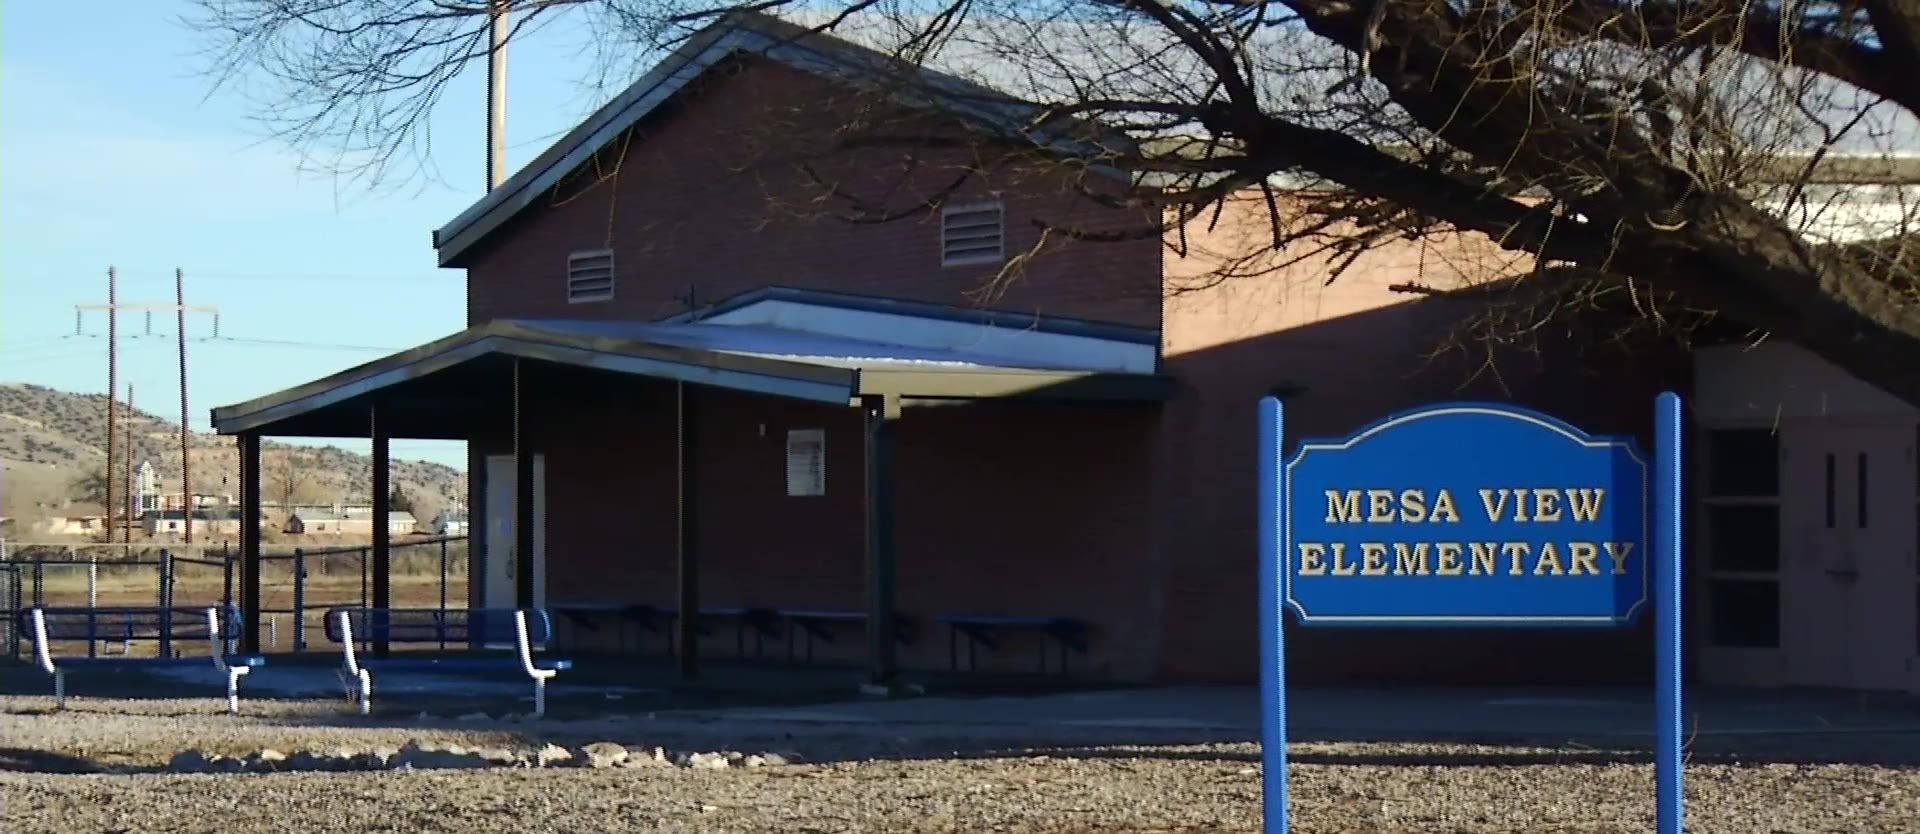 mesa view school building and sign